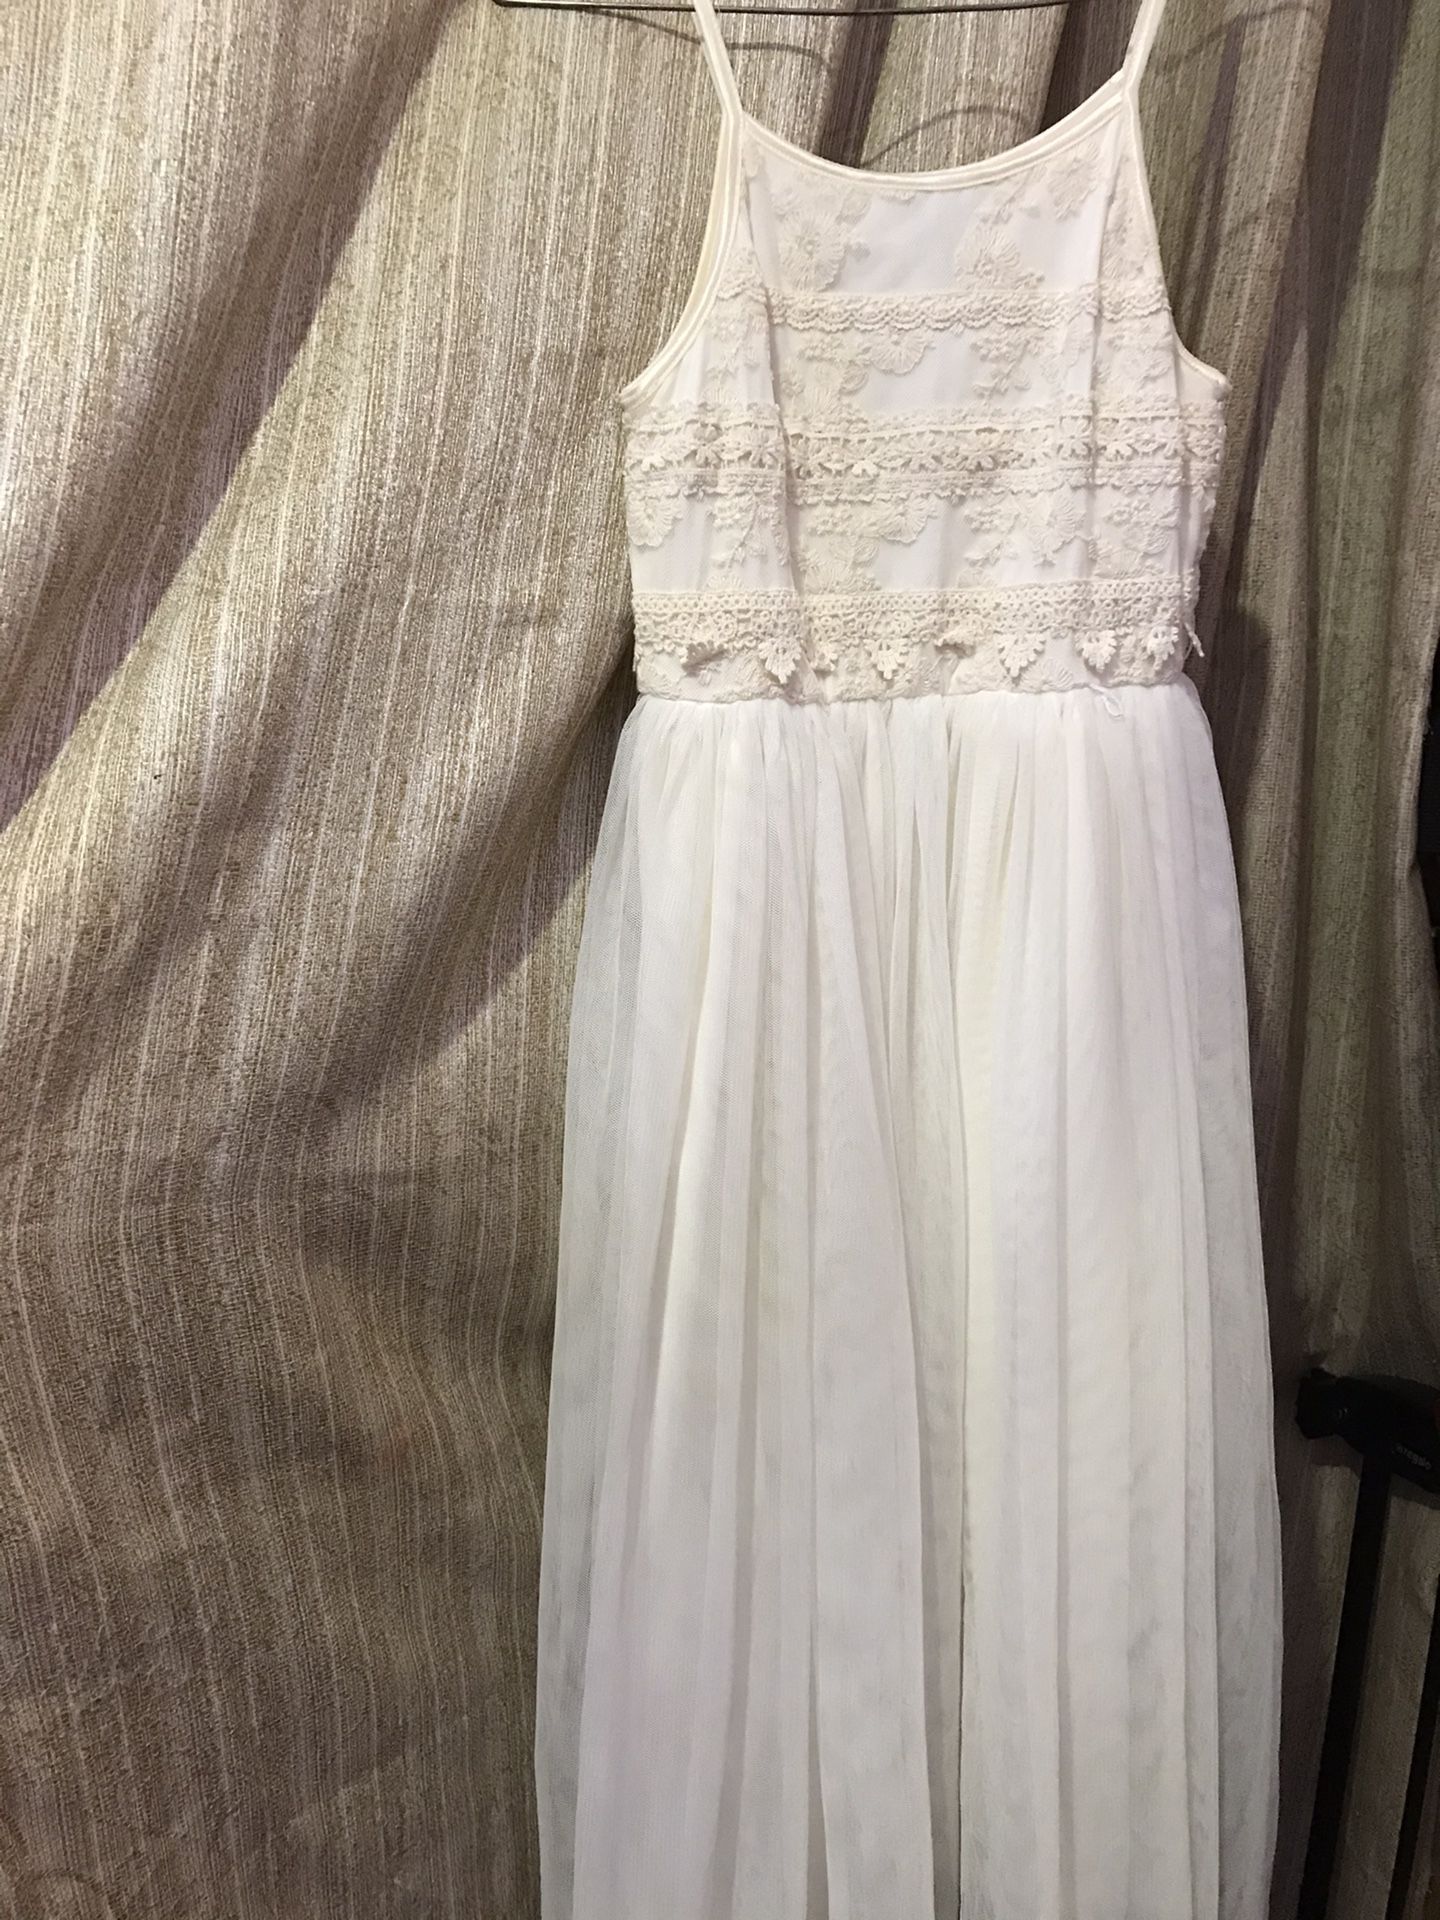 Beautiful Easter Or Confirmation Dress Size 12